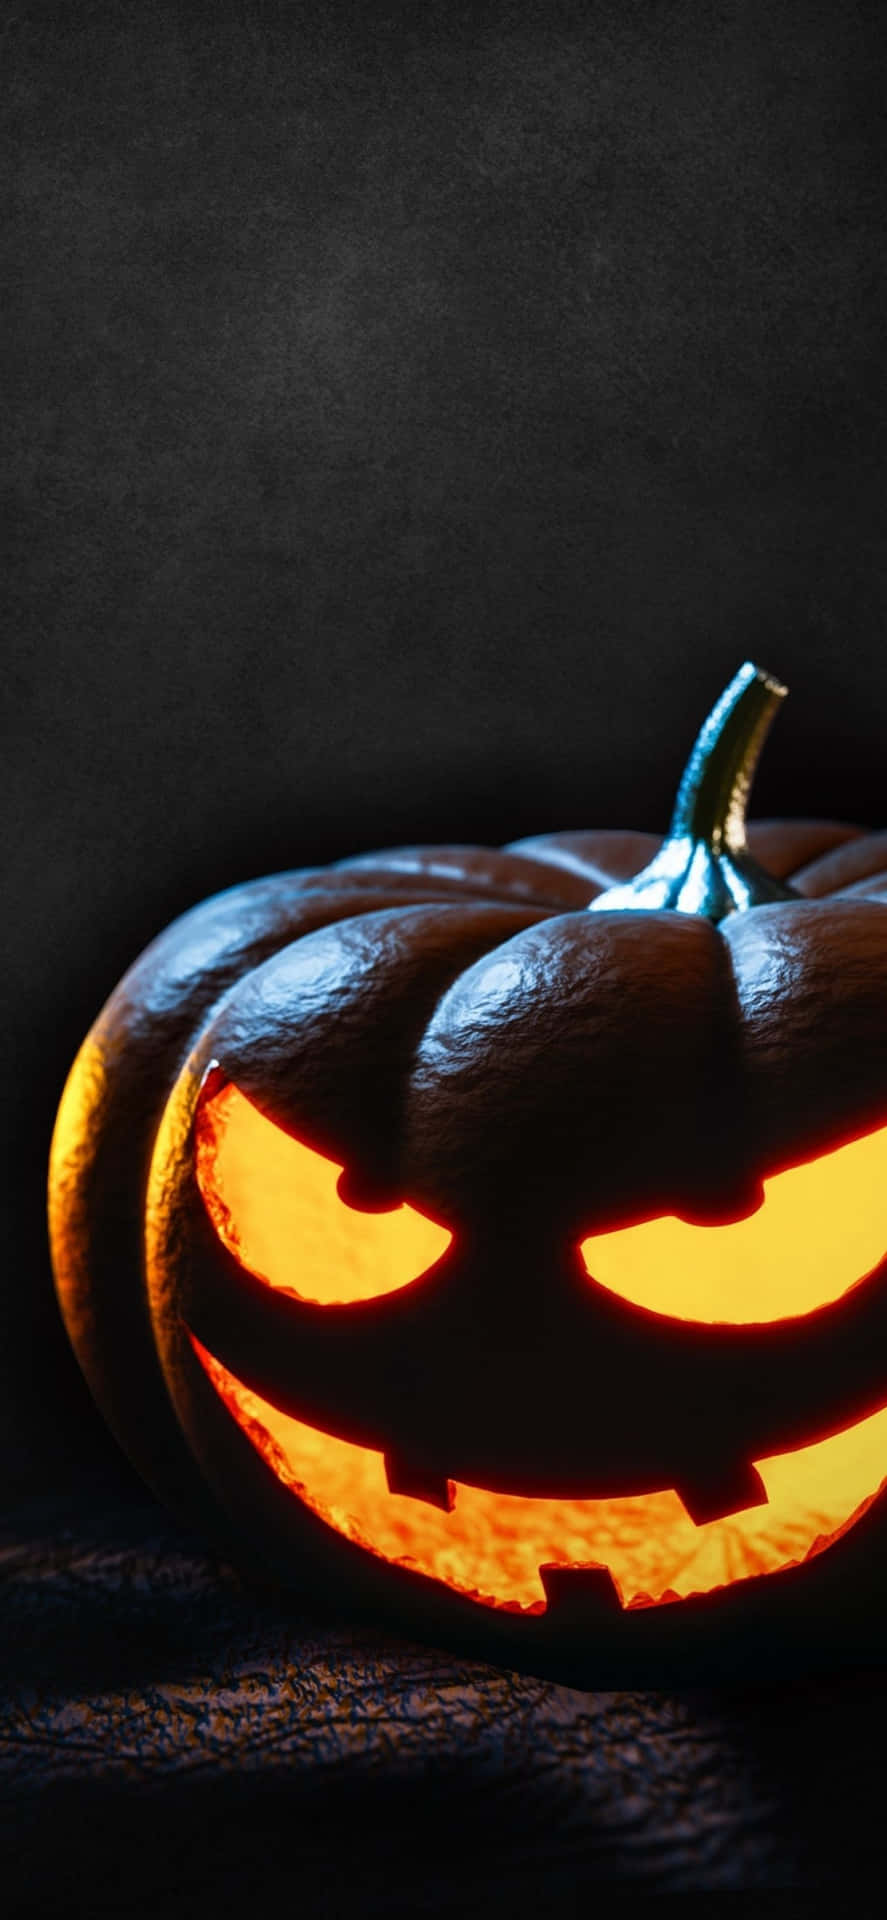 Get ready this Halloween with a spooky iPhone wallpaper